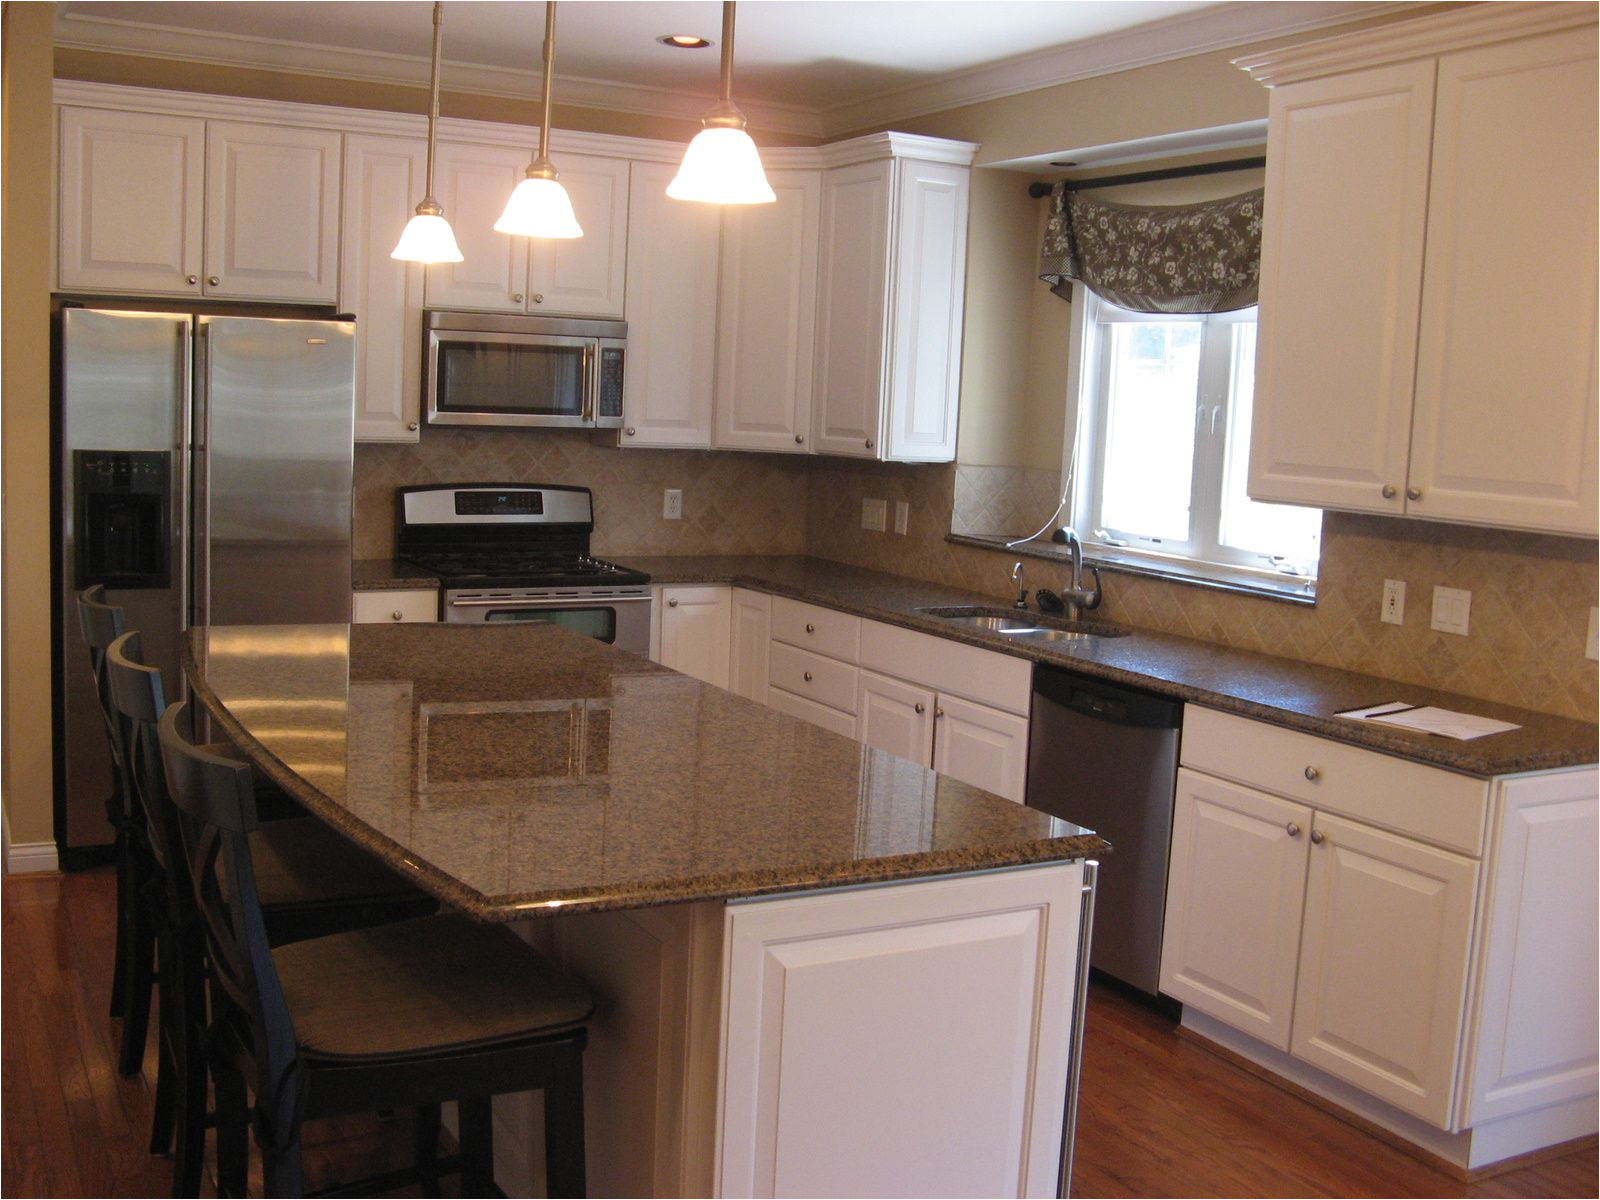 i love this kitchen granite color backsplash and the curtains